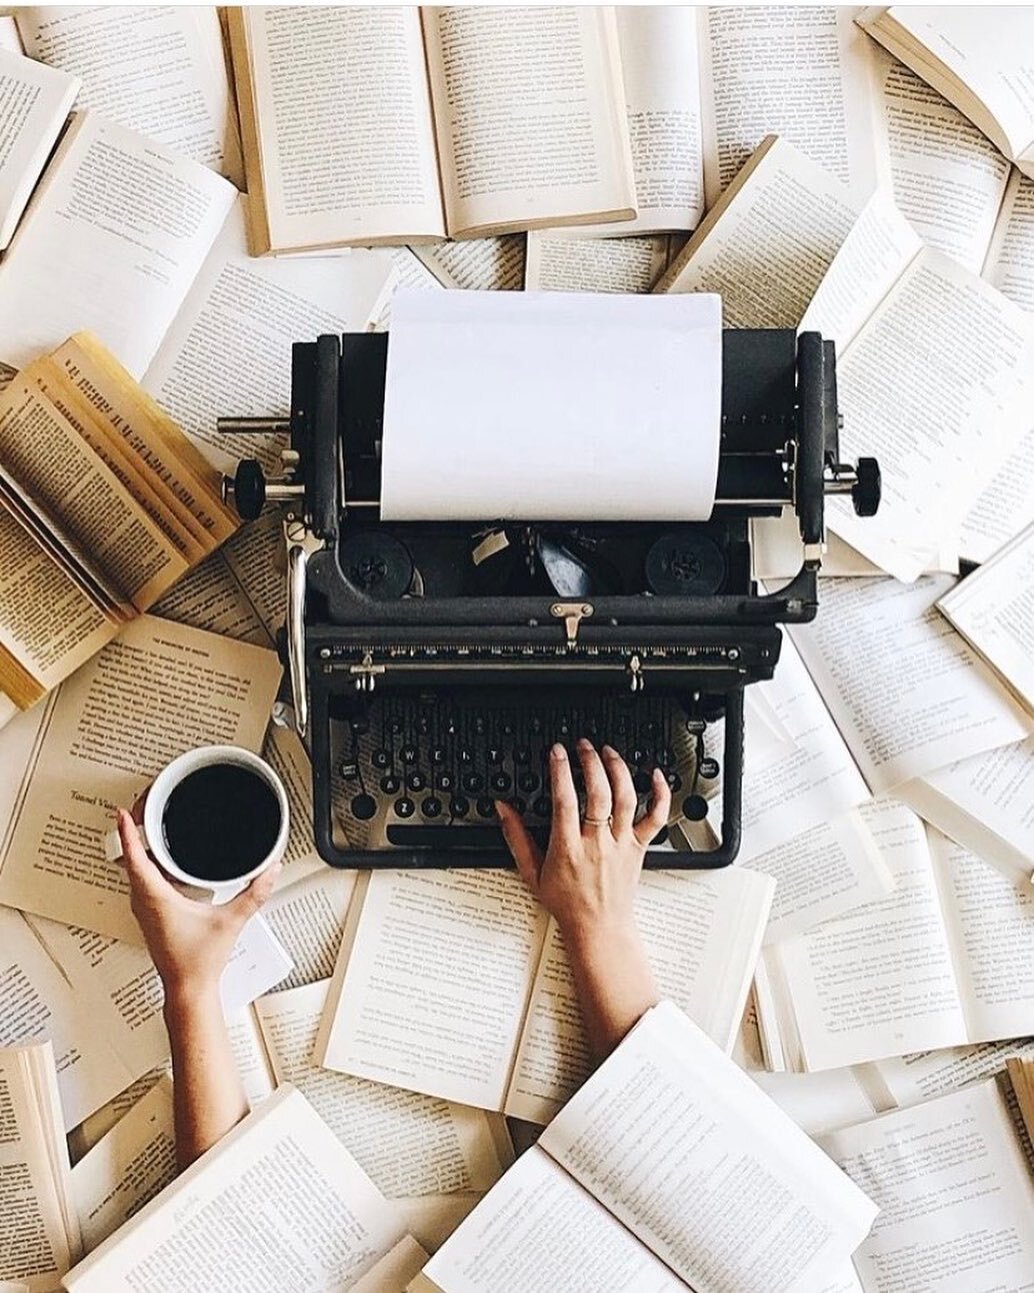 😱Don&rsquo;t you just hate it when you&rsquo;re trying to write, and a bunch of books are covering your arms, you&rsquo;re trying not to spill coffee on vintage pages, and all you have is an old typewriter that doesn&rsquo;t even work?! It&rsquo;s t